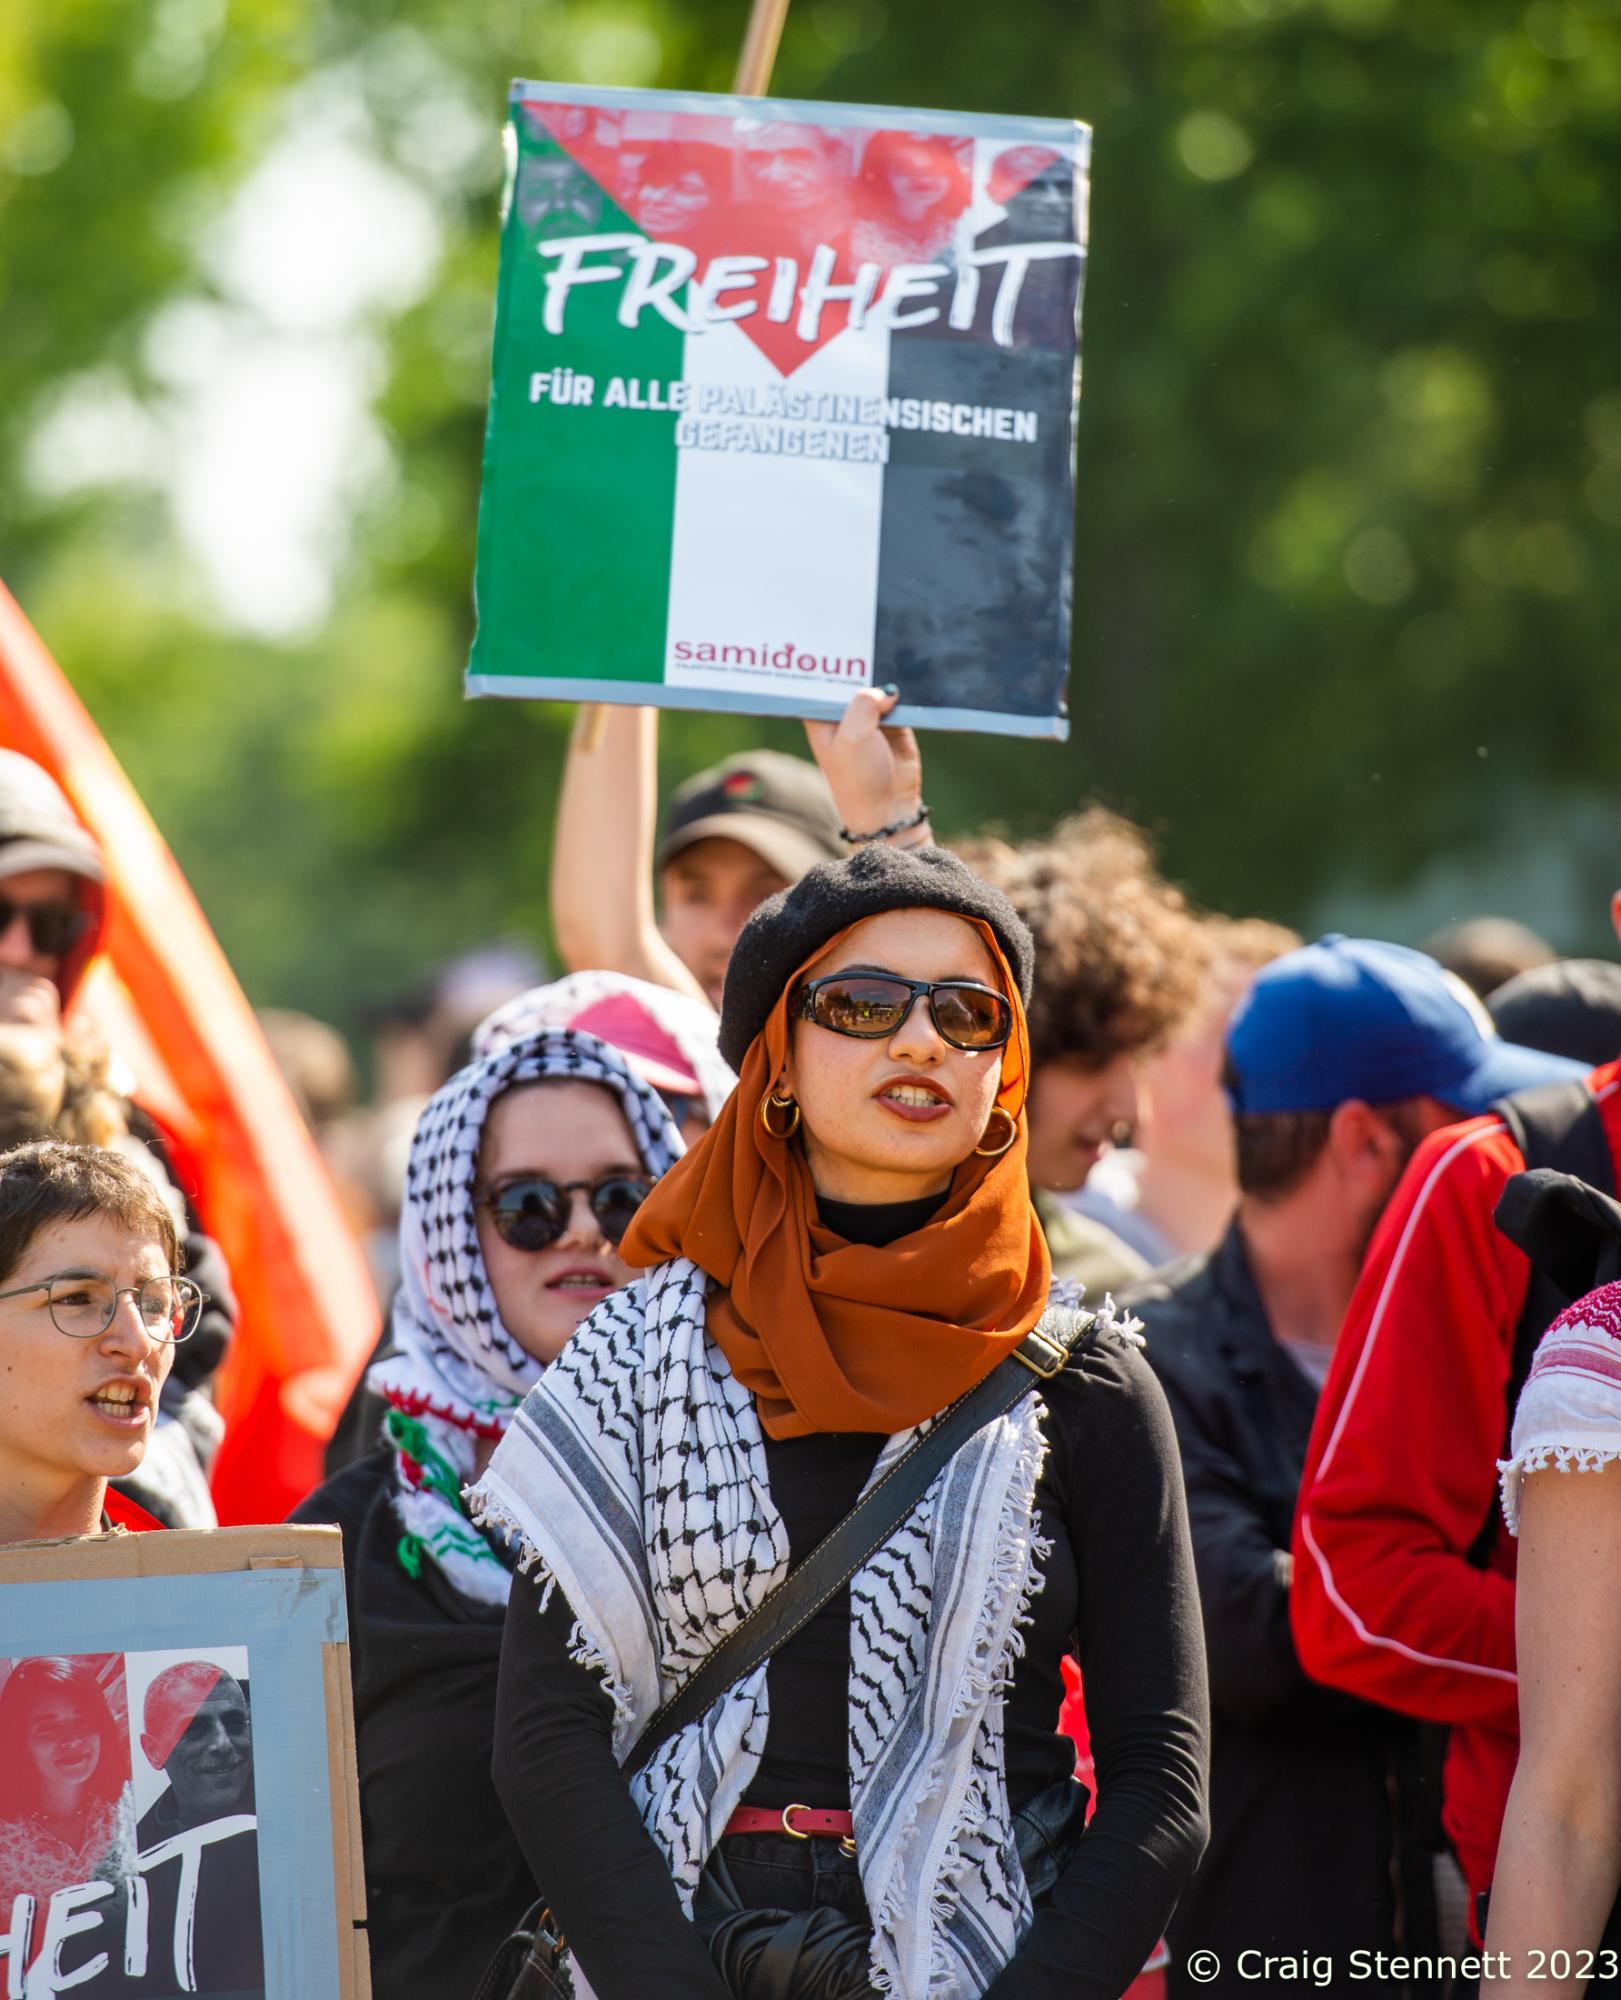 Jewish Berliners show support for Palestinian rights.